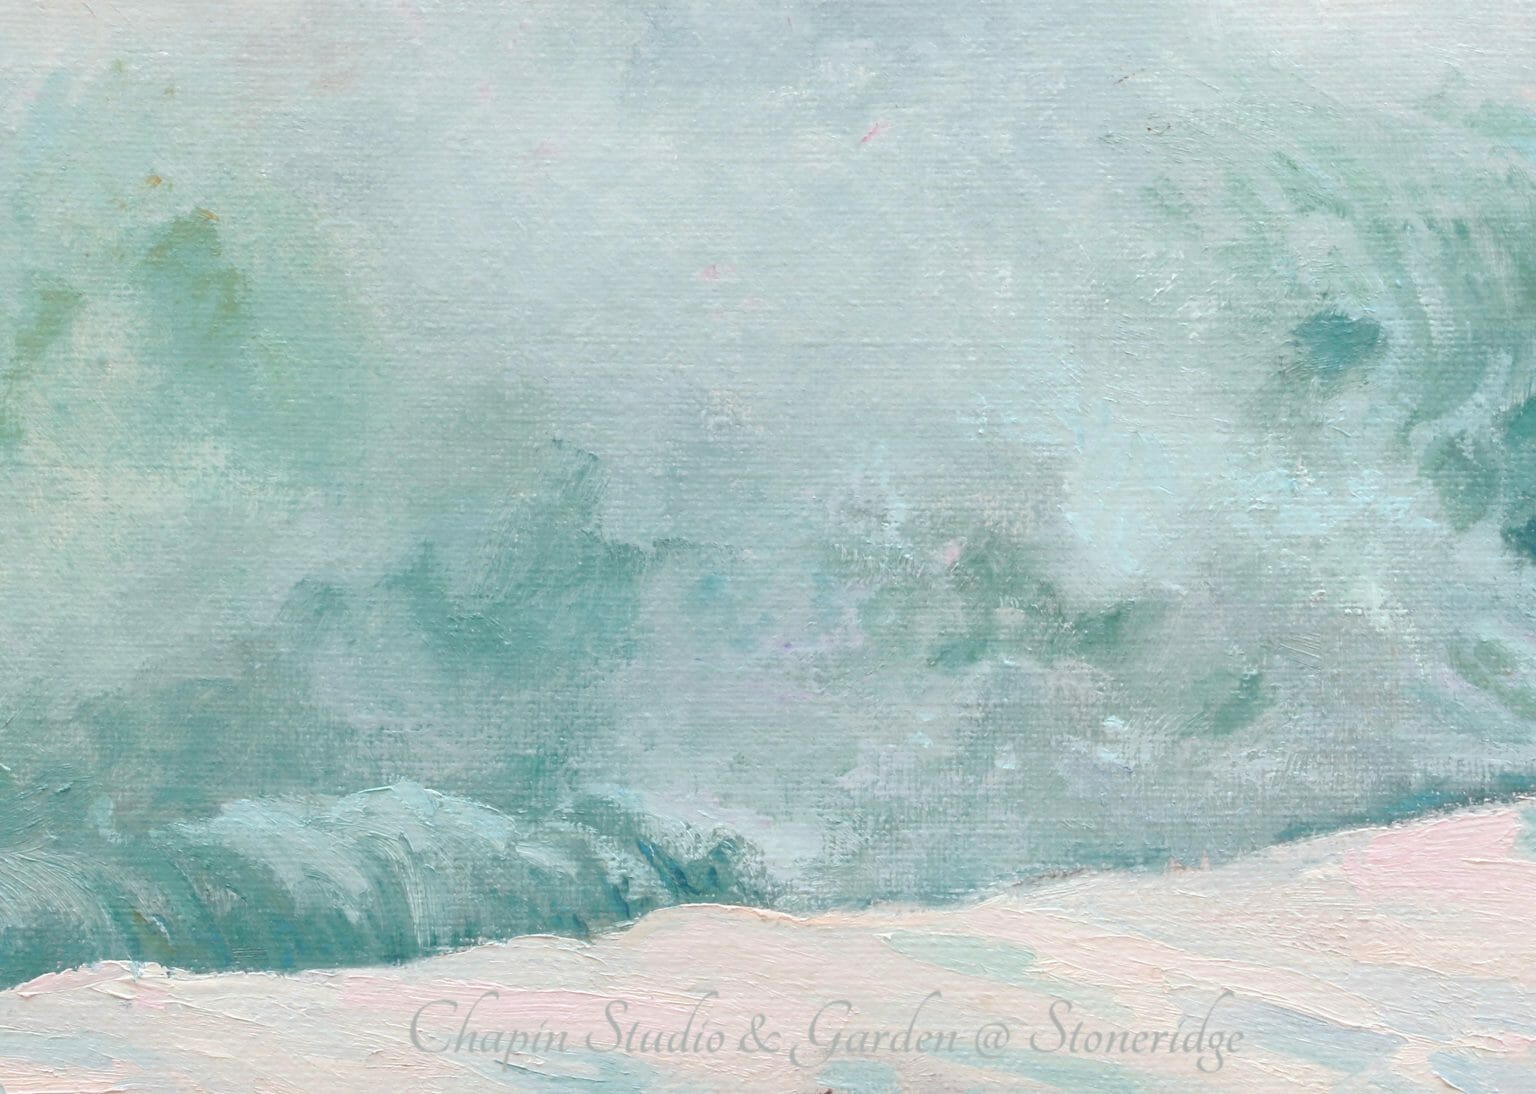 One of the premier American Women Artists of the 1980's-present,  Deborah Chapin, is starting as a mature woman marine artist with a new series depicting  White Horses of the Sea.   “White Horses of the Sea 2" at Pemaquid Point Lighthouse, is original art, a Maine art piece inspired by the poem “White Horses of the Sea”